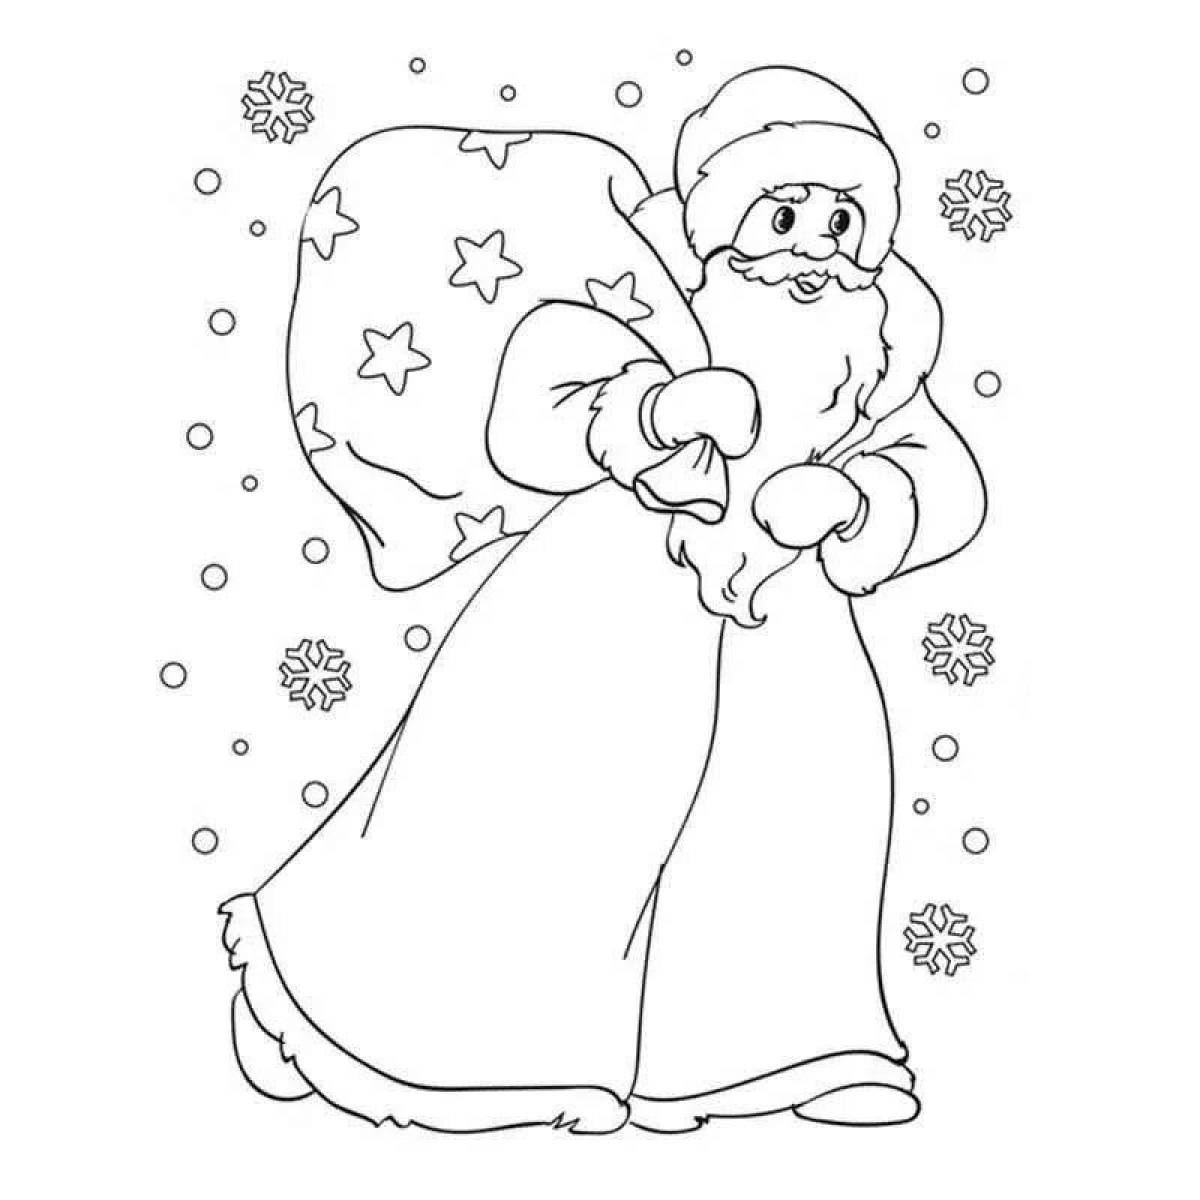 Wonderful coloring Santa Claus and Snow Maiden